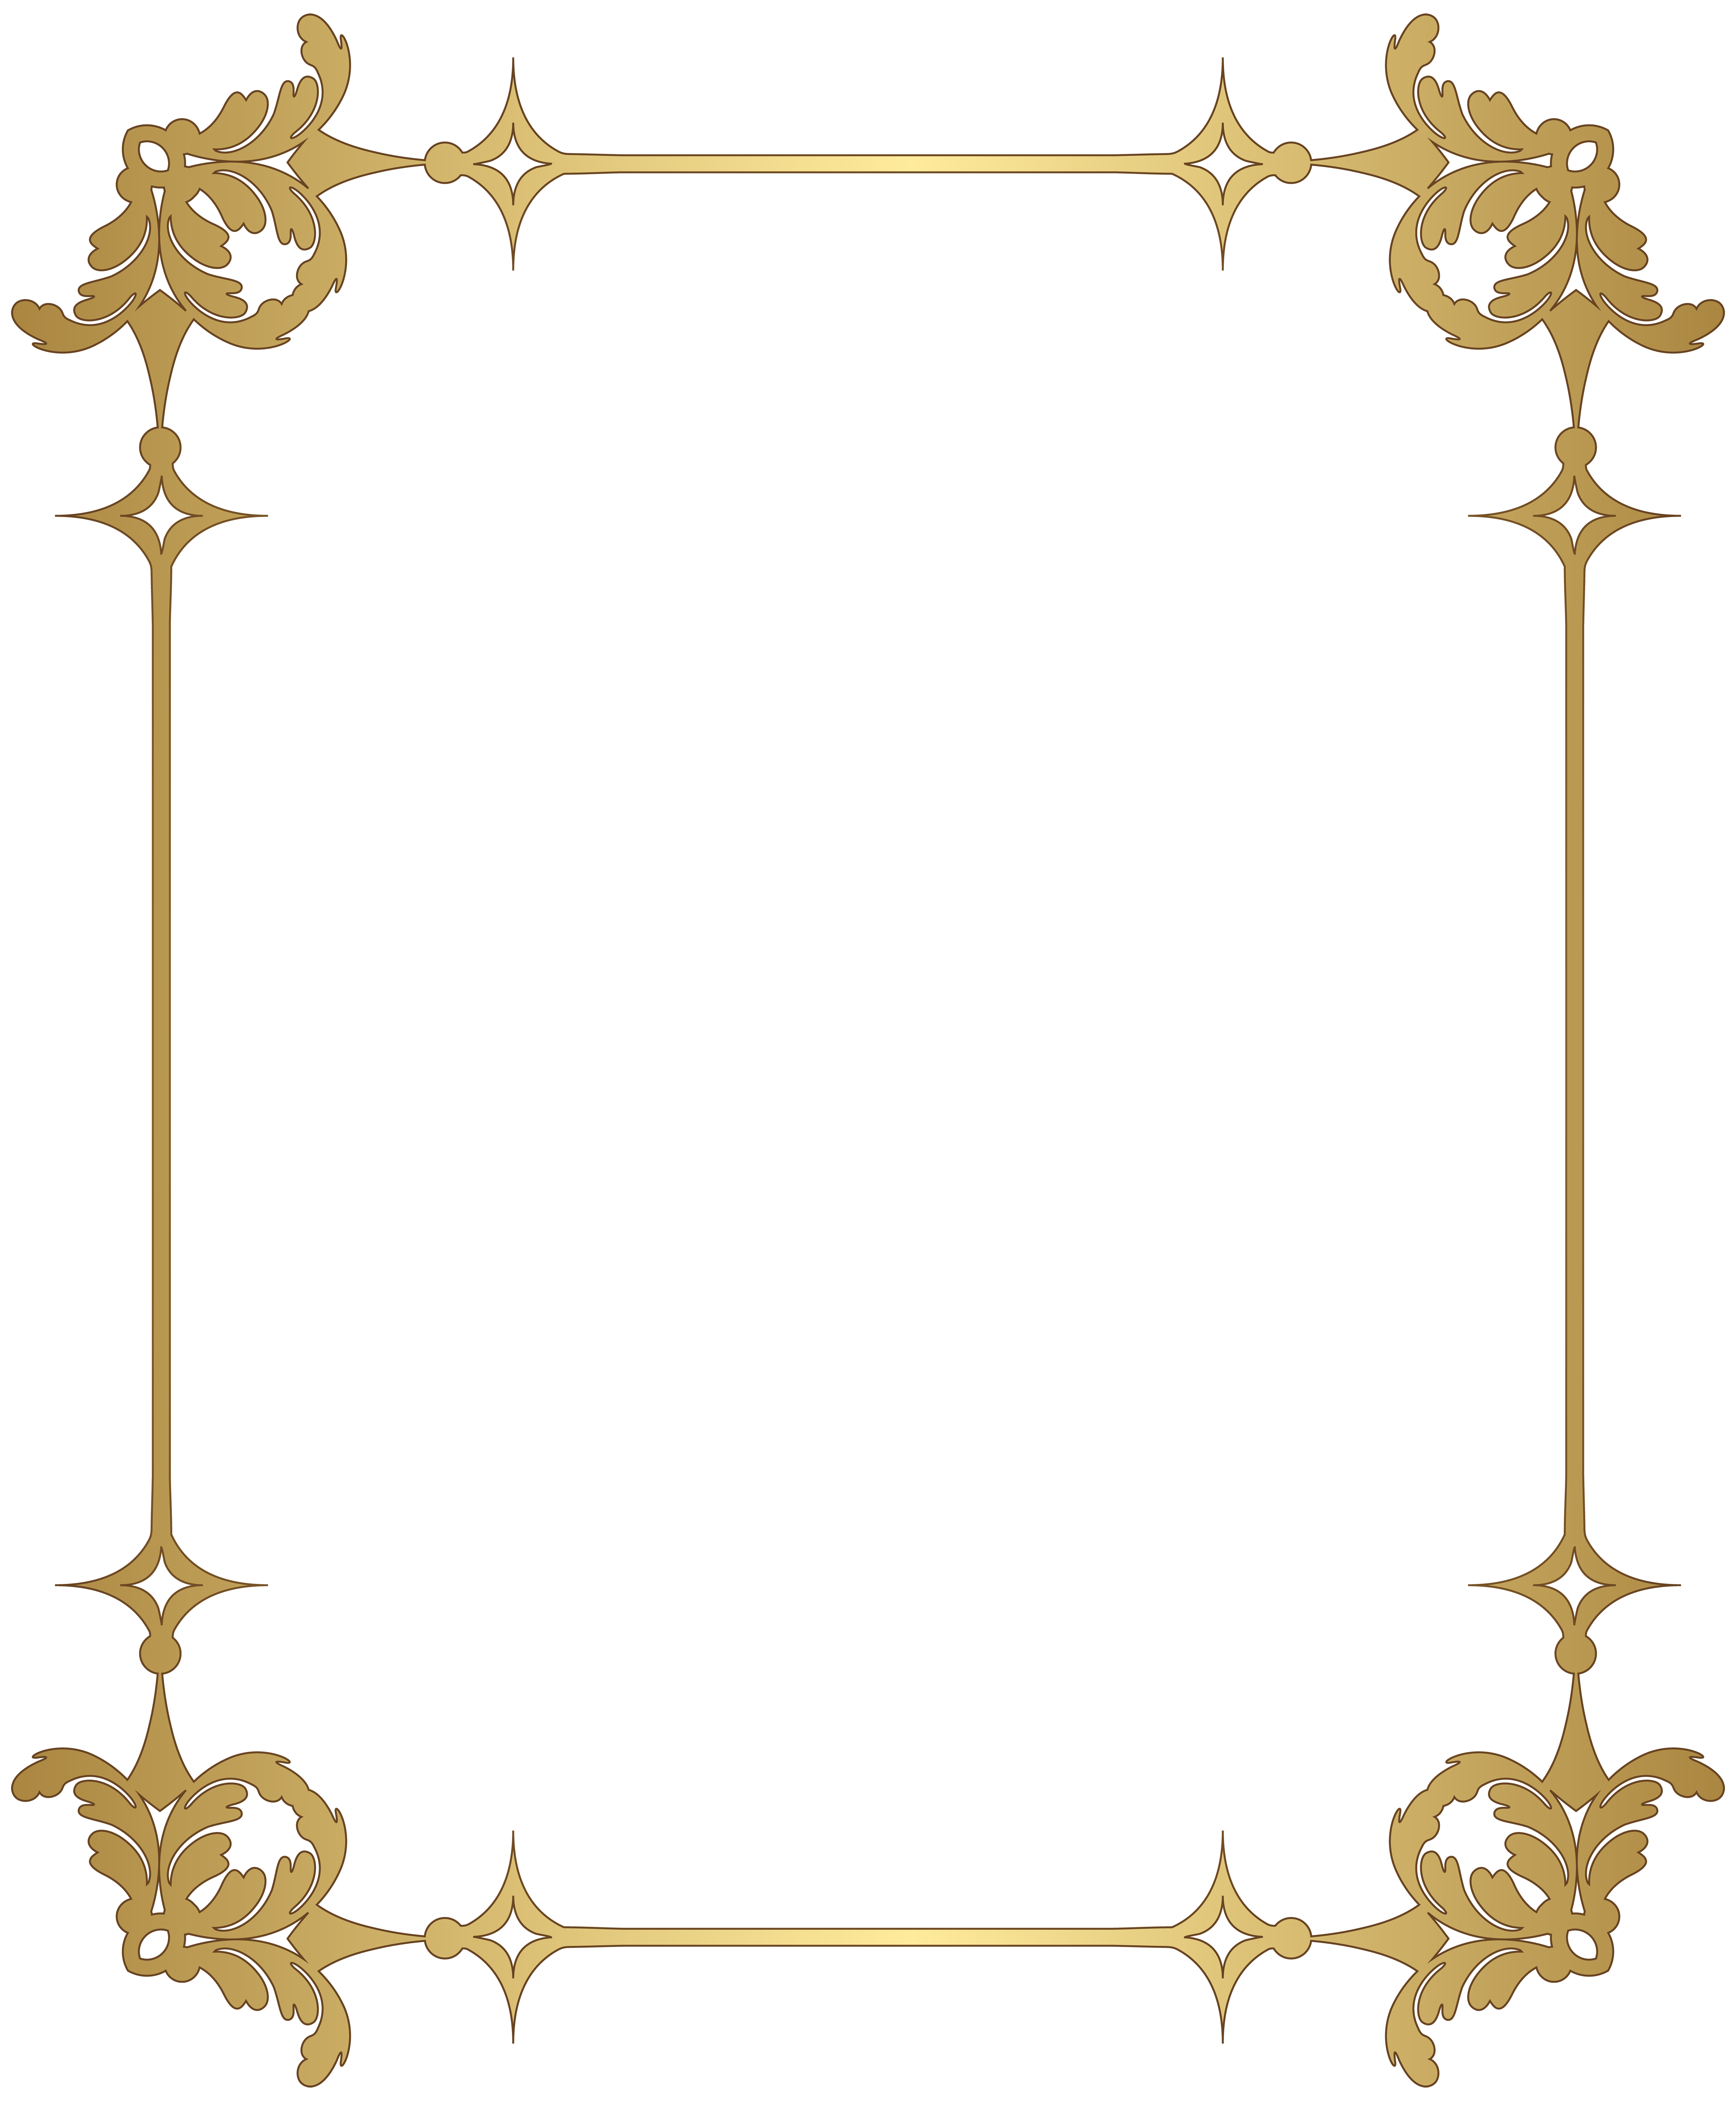 Fancy Border Frame Png Free For Commercial Use High Quality Images